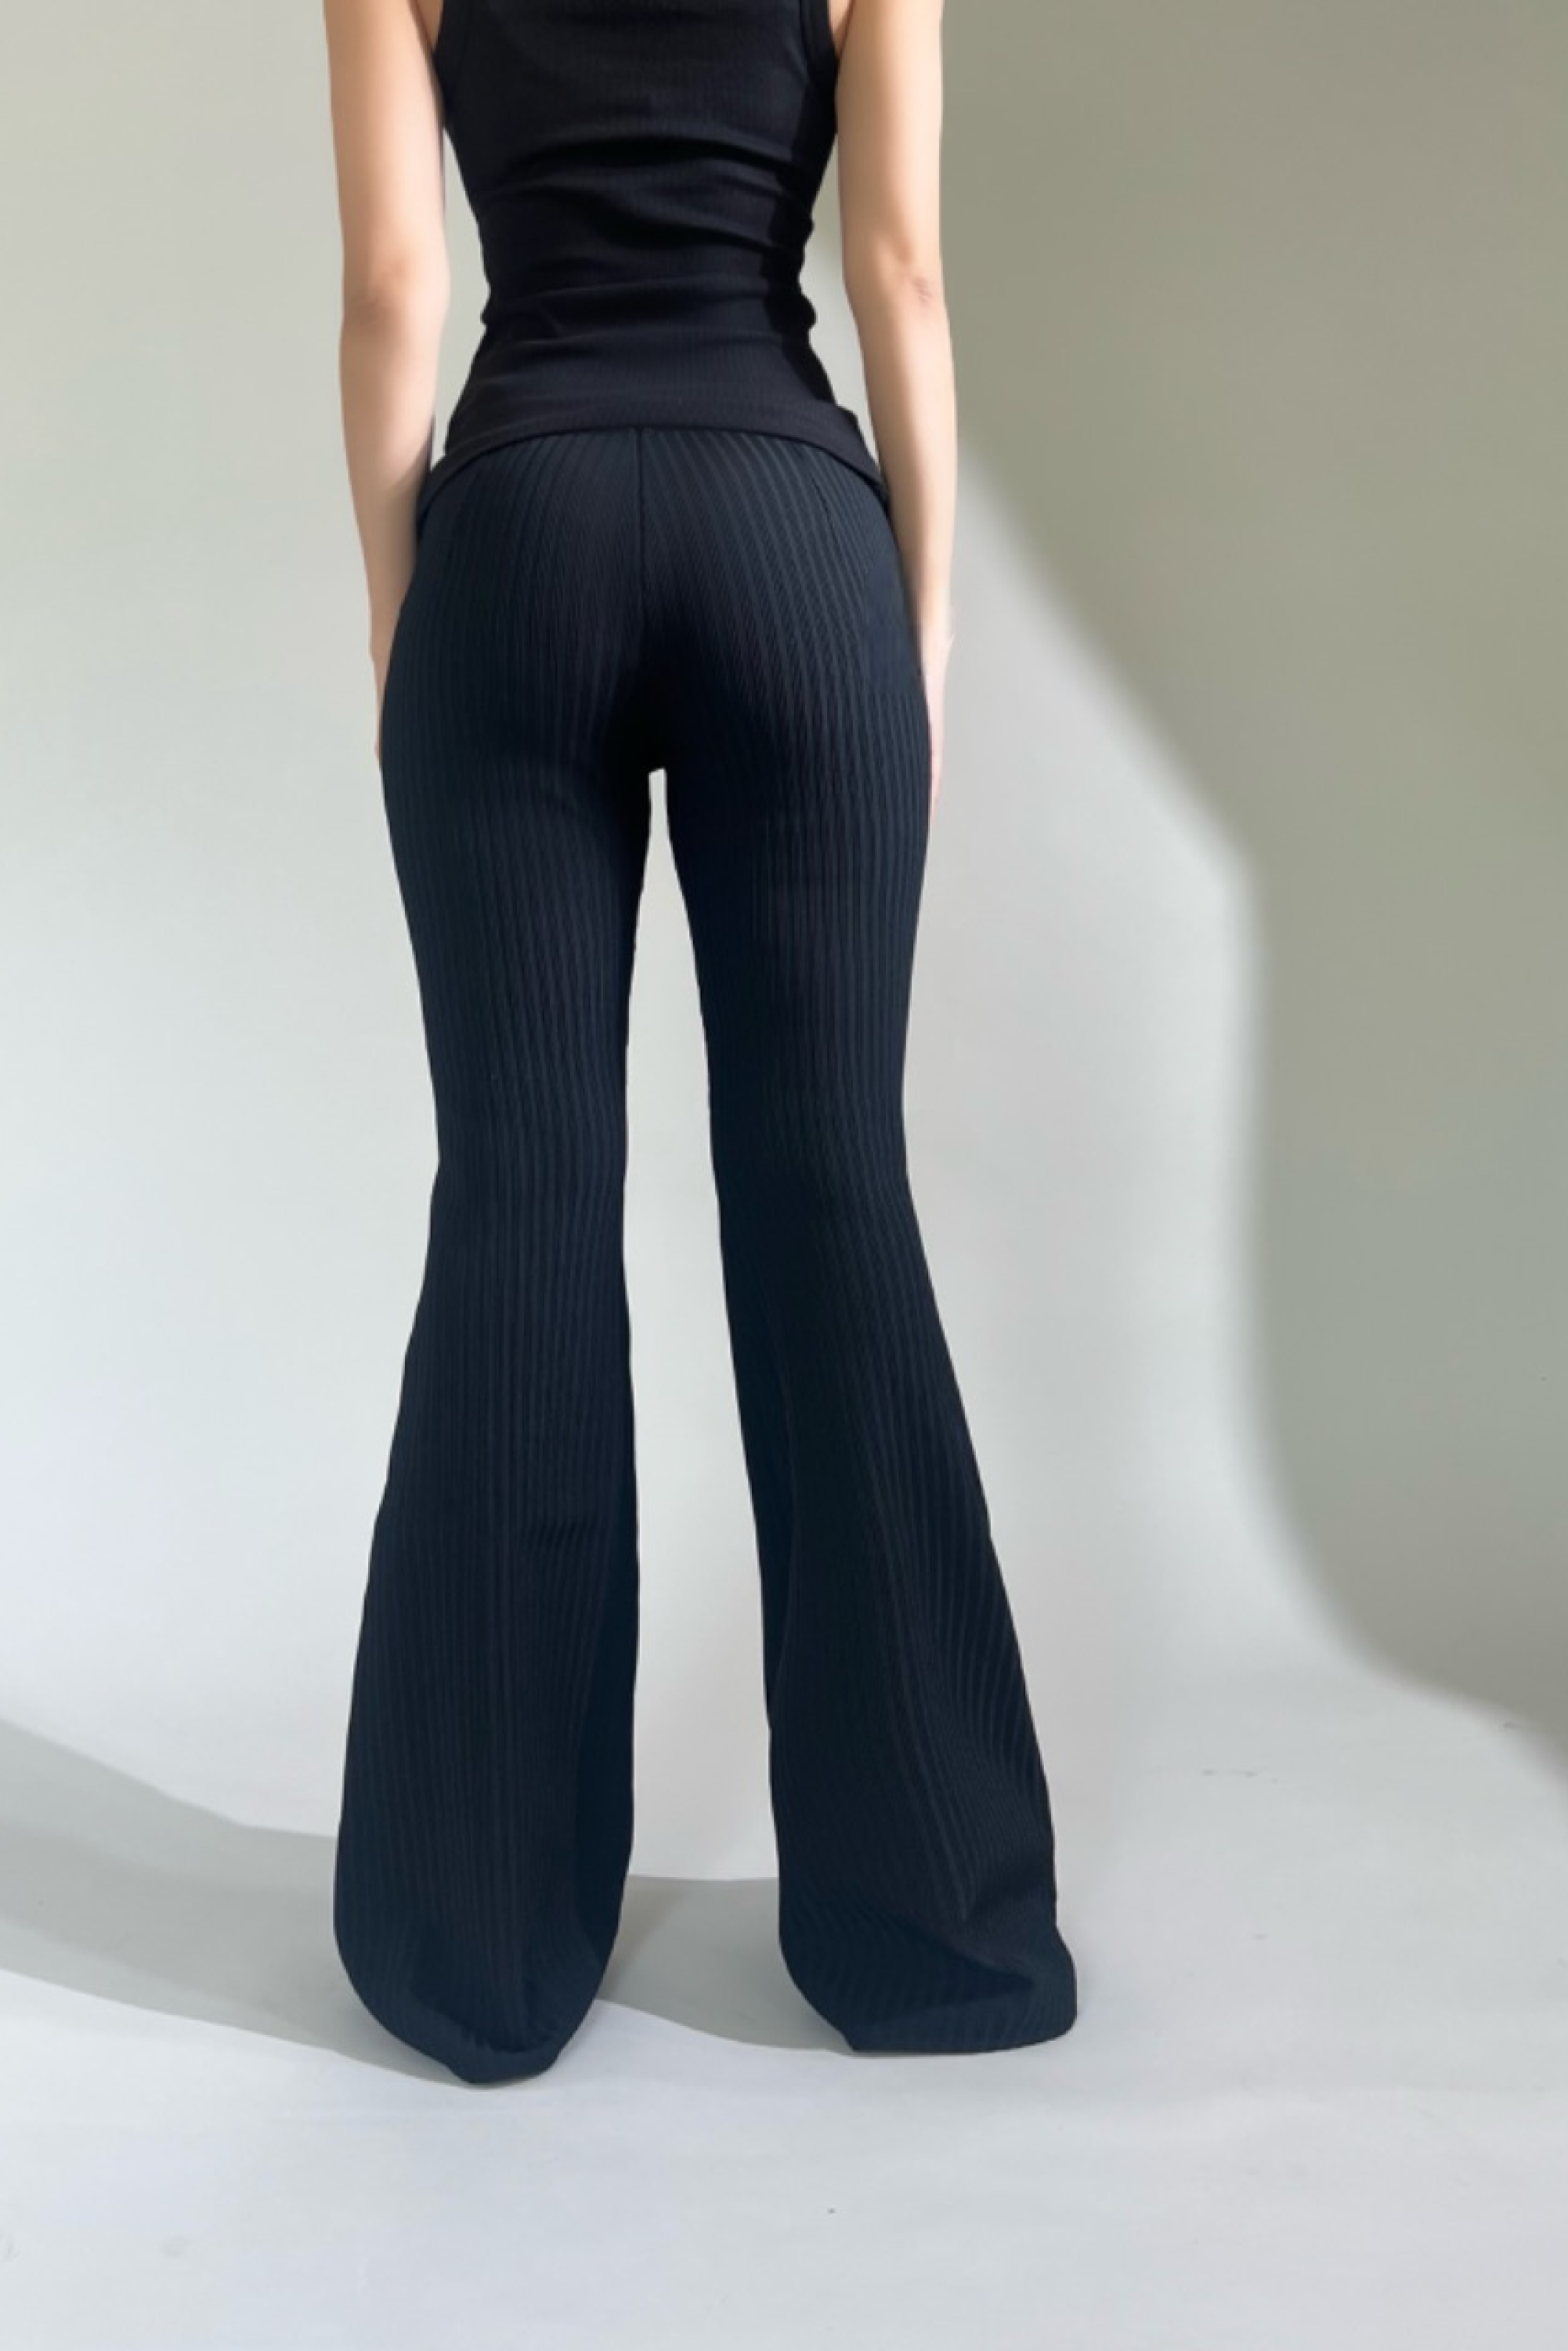 Bell Bottom Pants for Retro Chic  Self-Cntrd Collection –